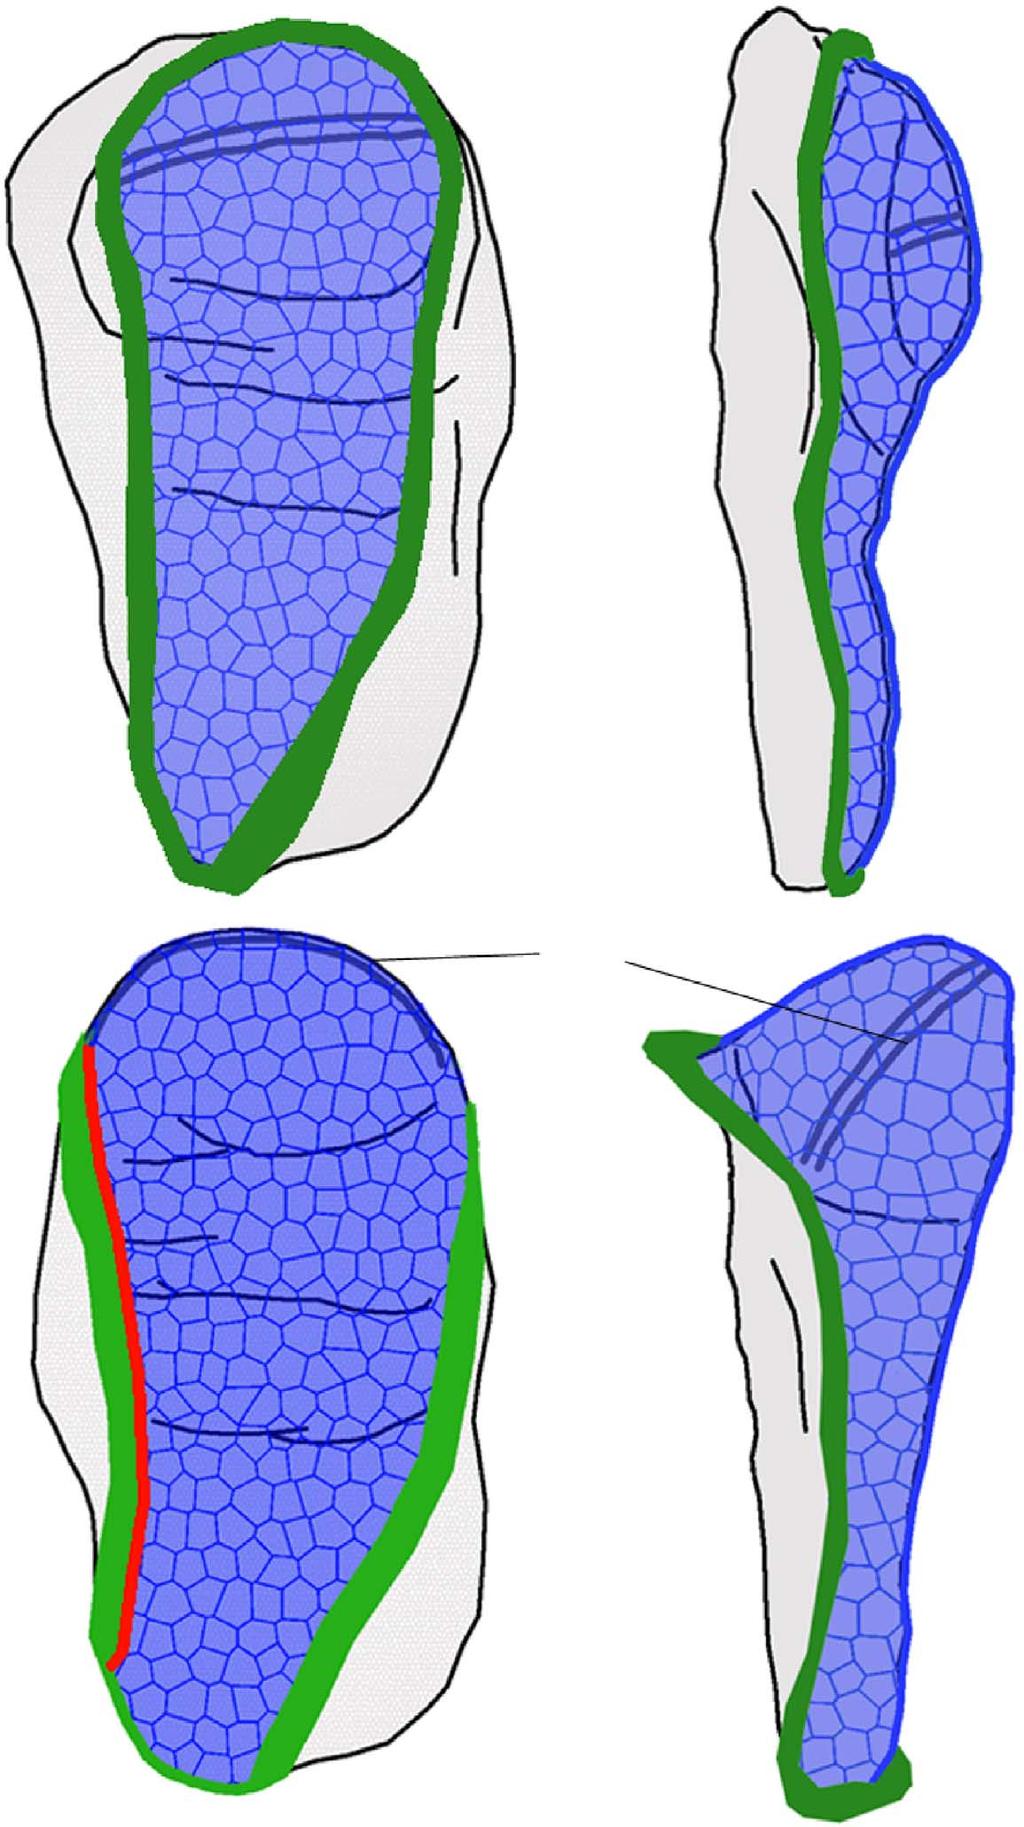 (b) Scheme showing relevant domains of the peripodial epithelium in a frontal (left) and a lateral (right) view at the same stage.